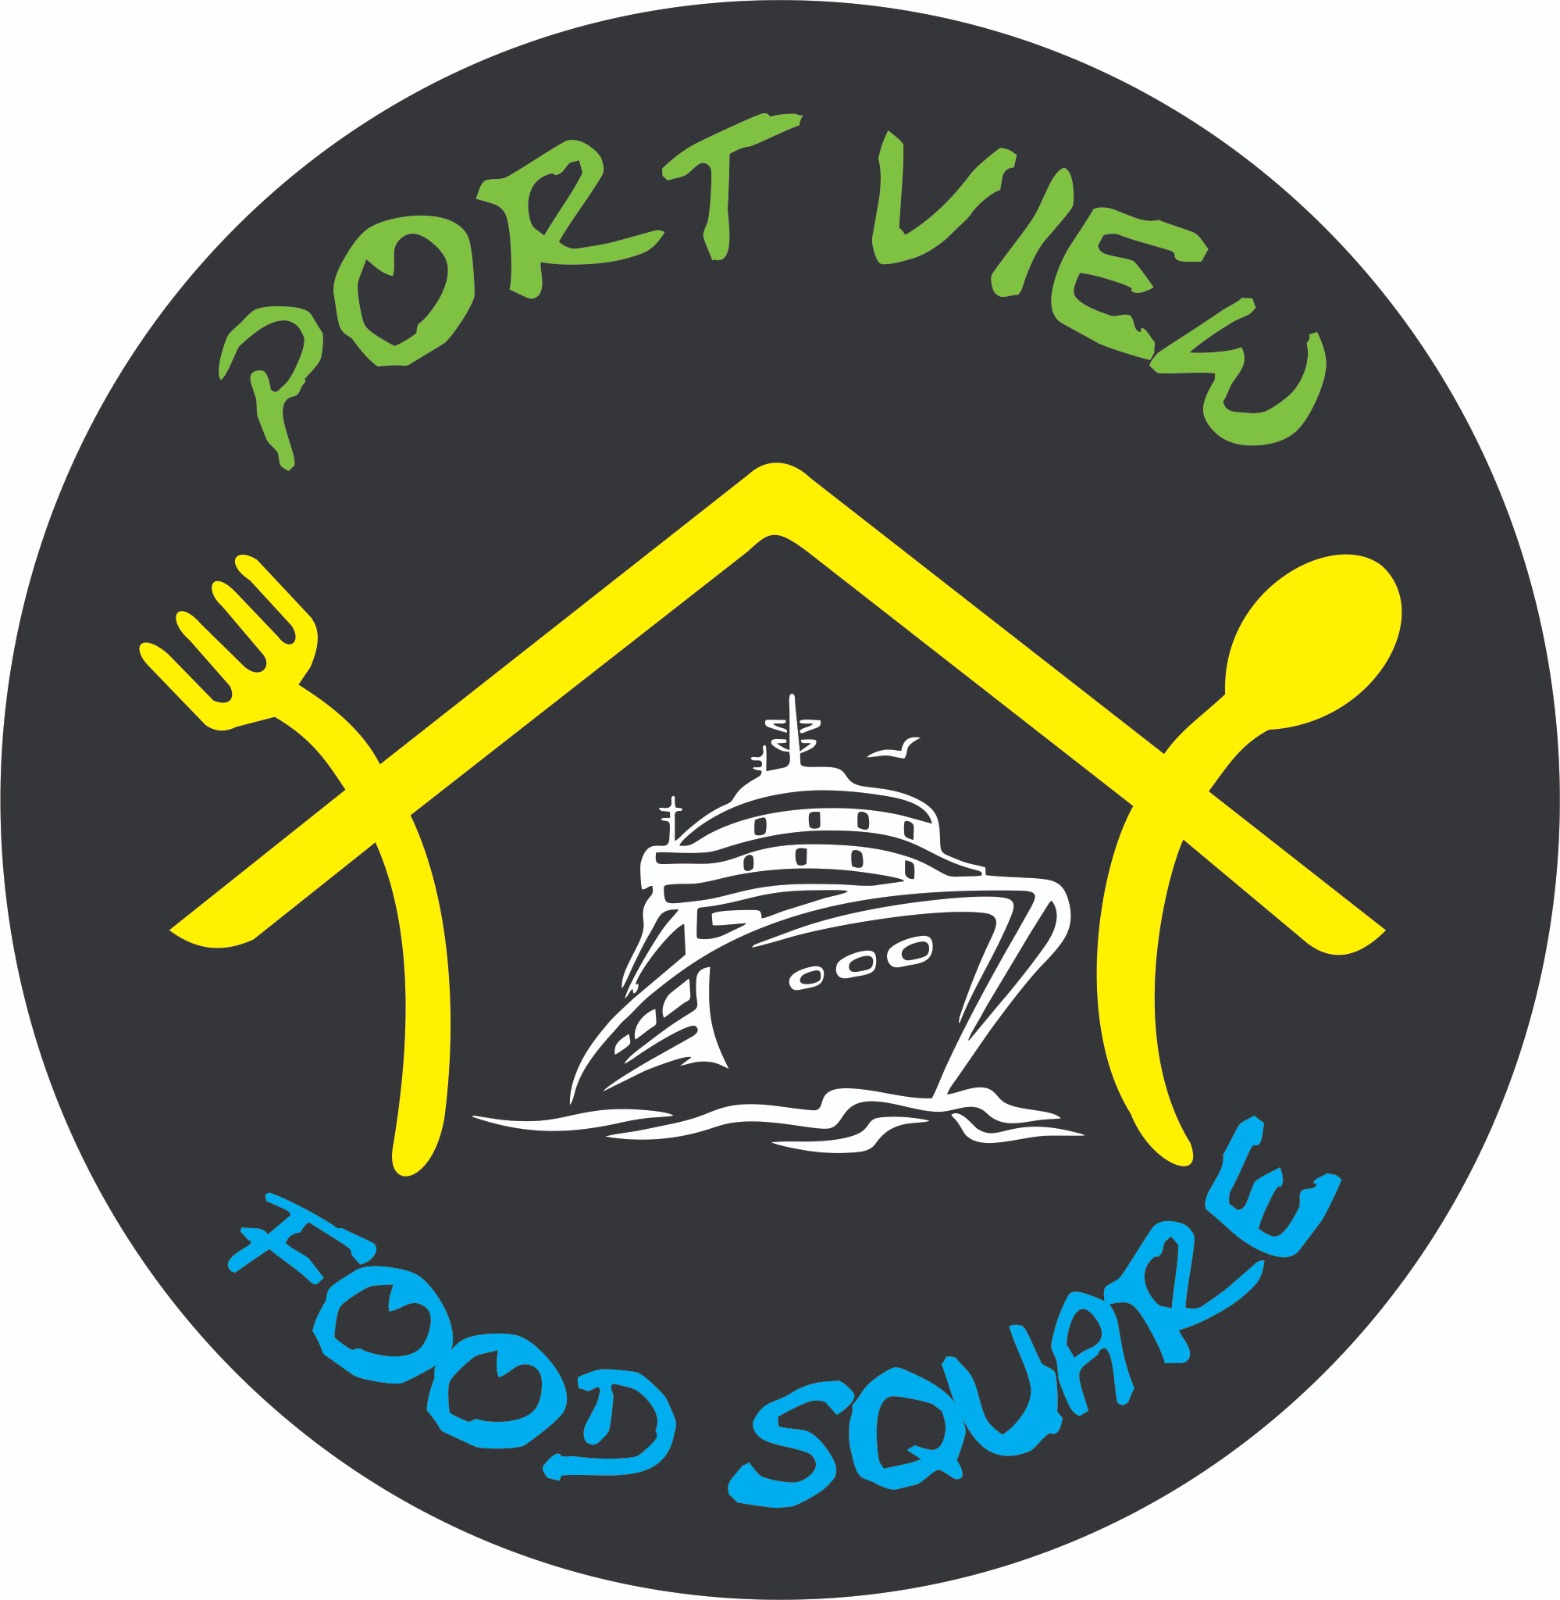 Port View Food Square